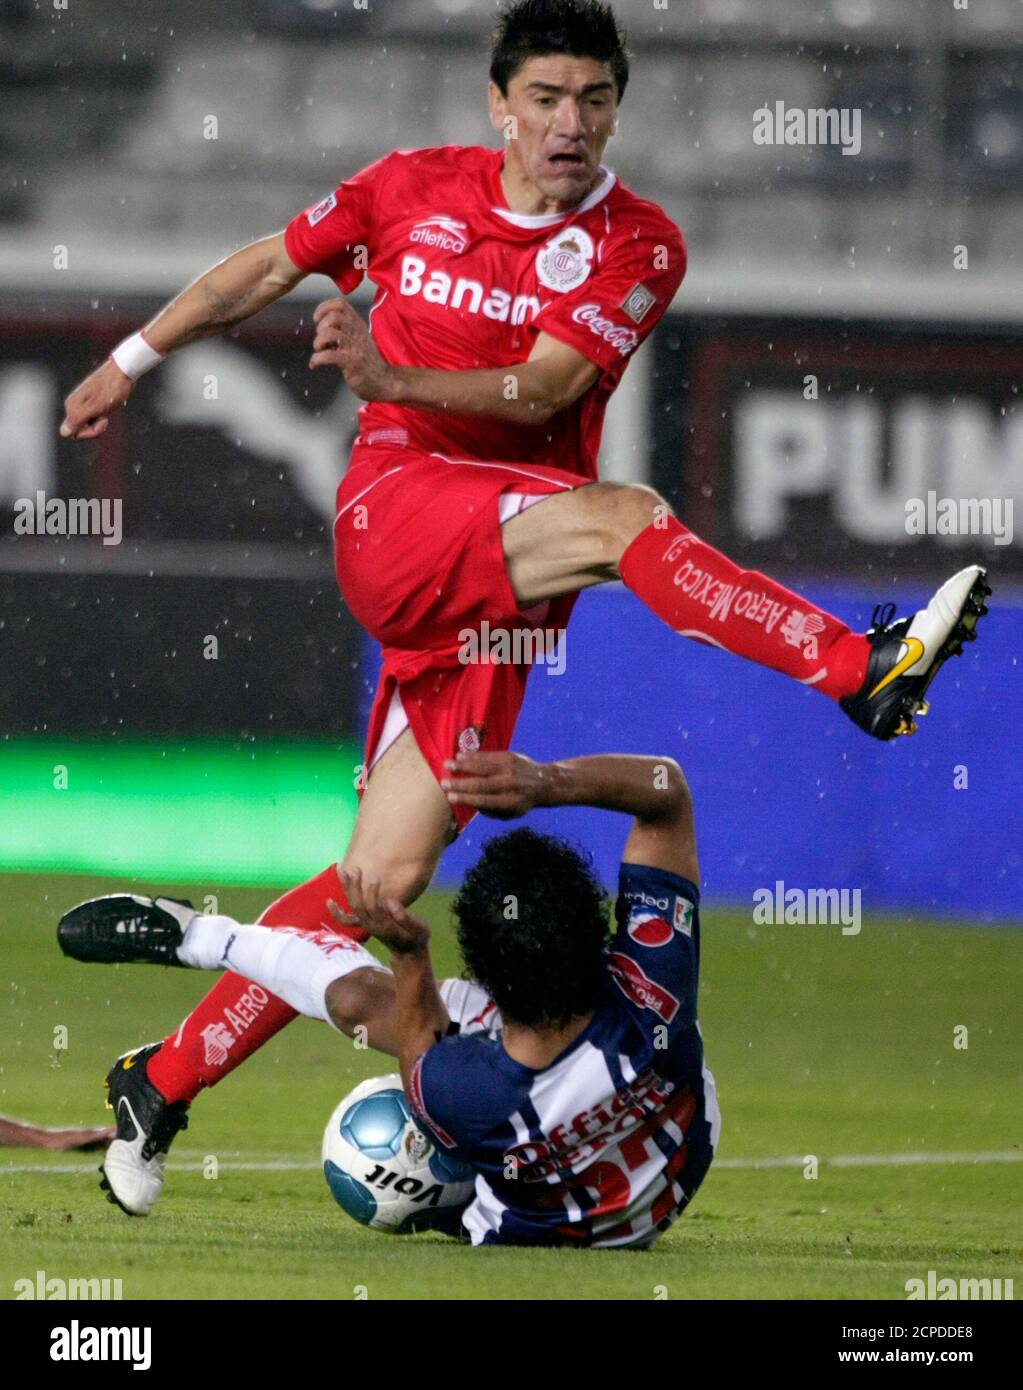 Pachuca midfielder Edy Brambila (bottom) battles for the ball against Toluca striker Hector Mancilla (top) of Paraguay during their Mexican league championship soccer match in Hidalgo stadium in Pachuca City, Mexico, April 17, 2010. REUTERS/Henry Romero (MEXICO - Tags: SPORT SOCCER) Stock Photo